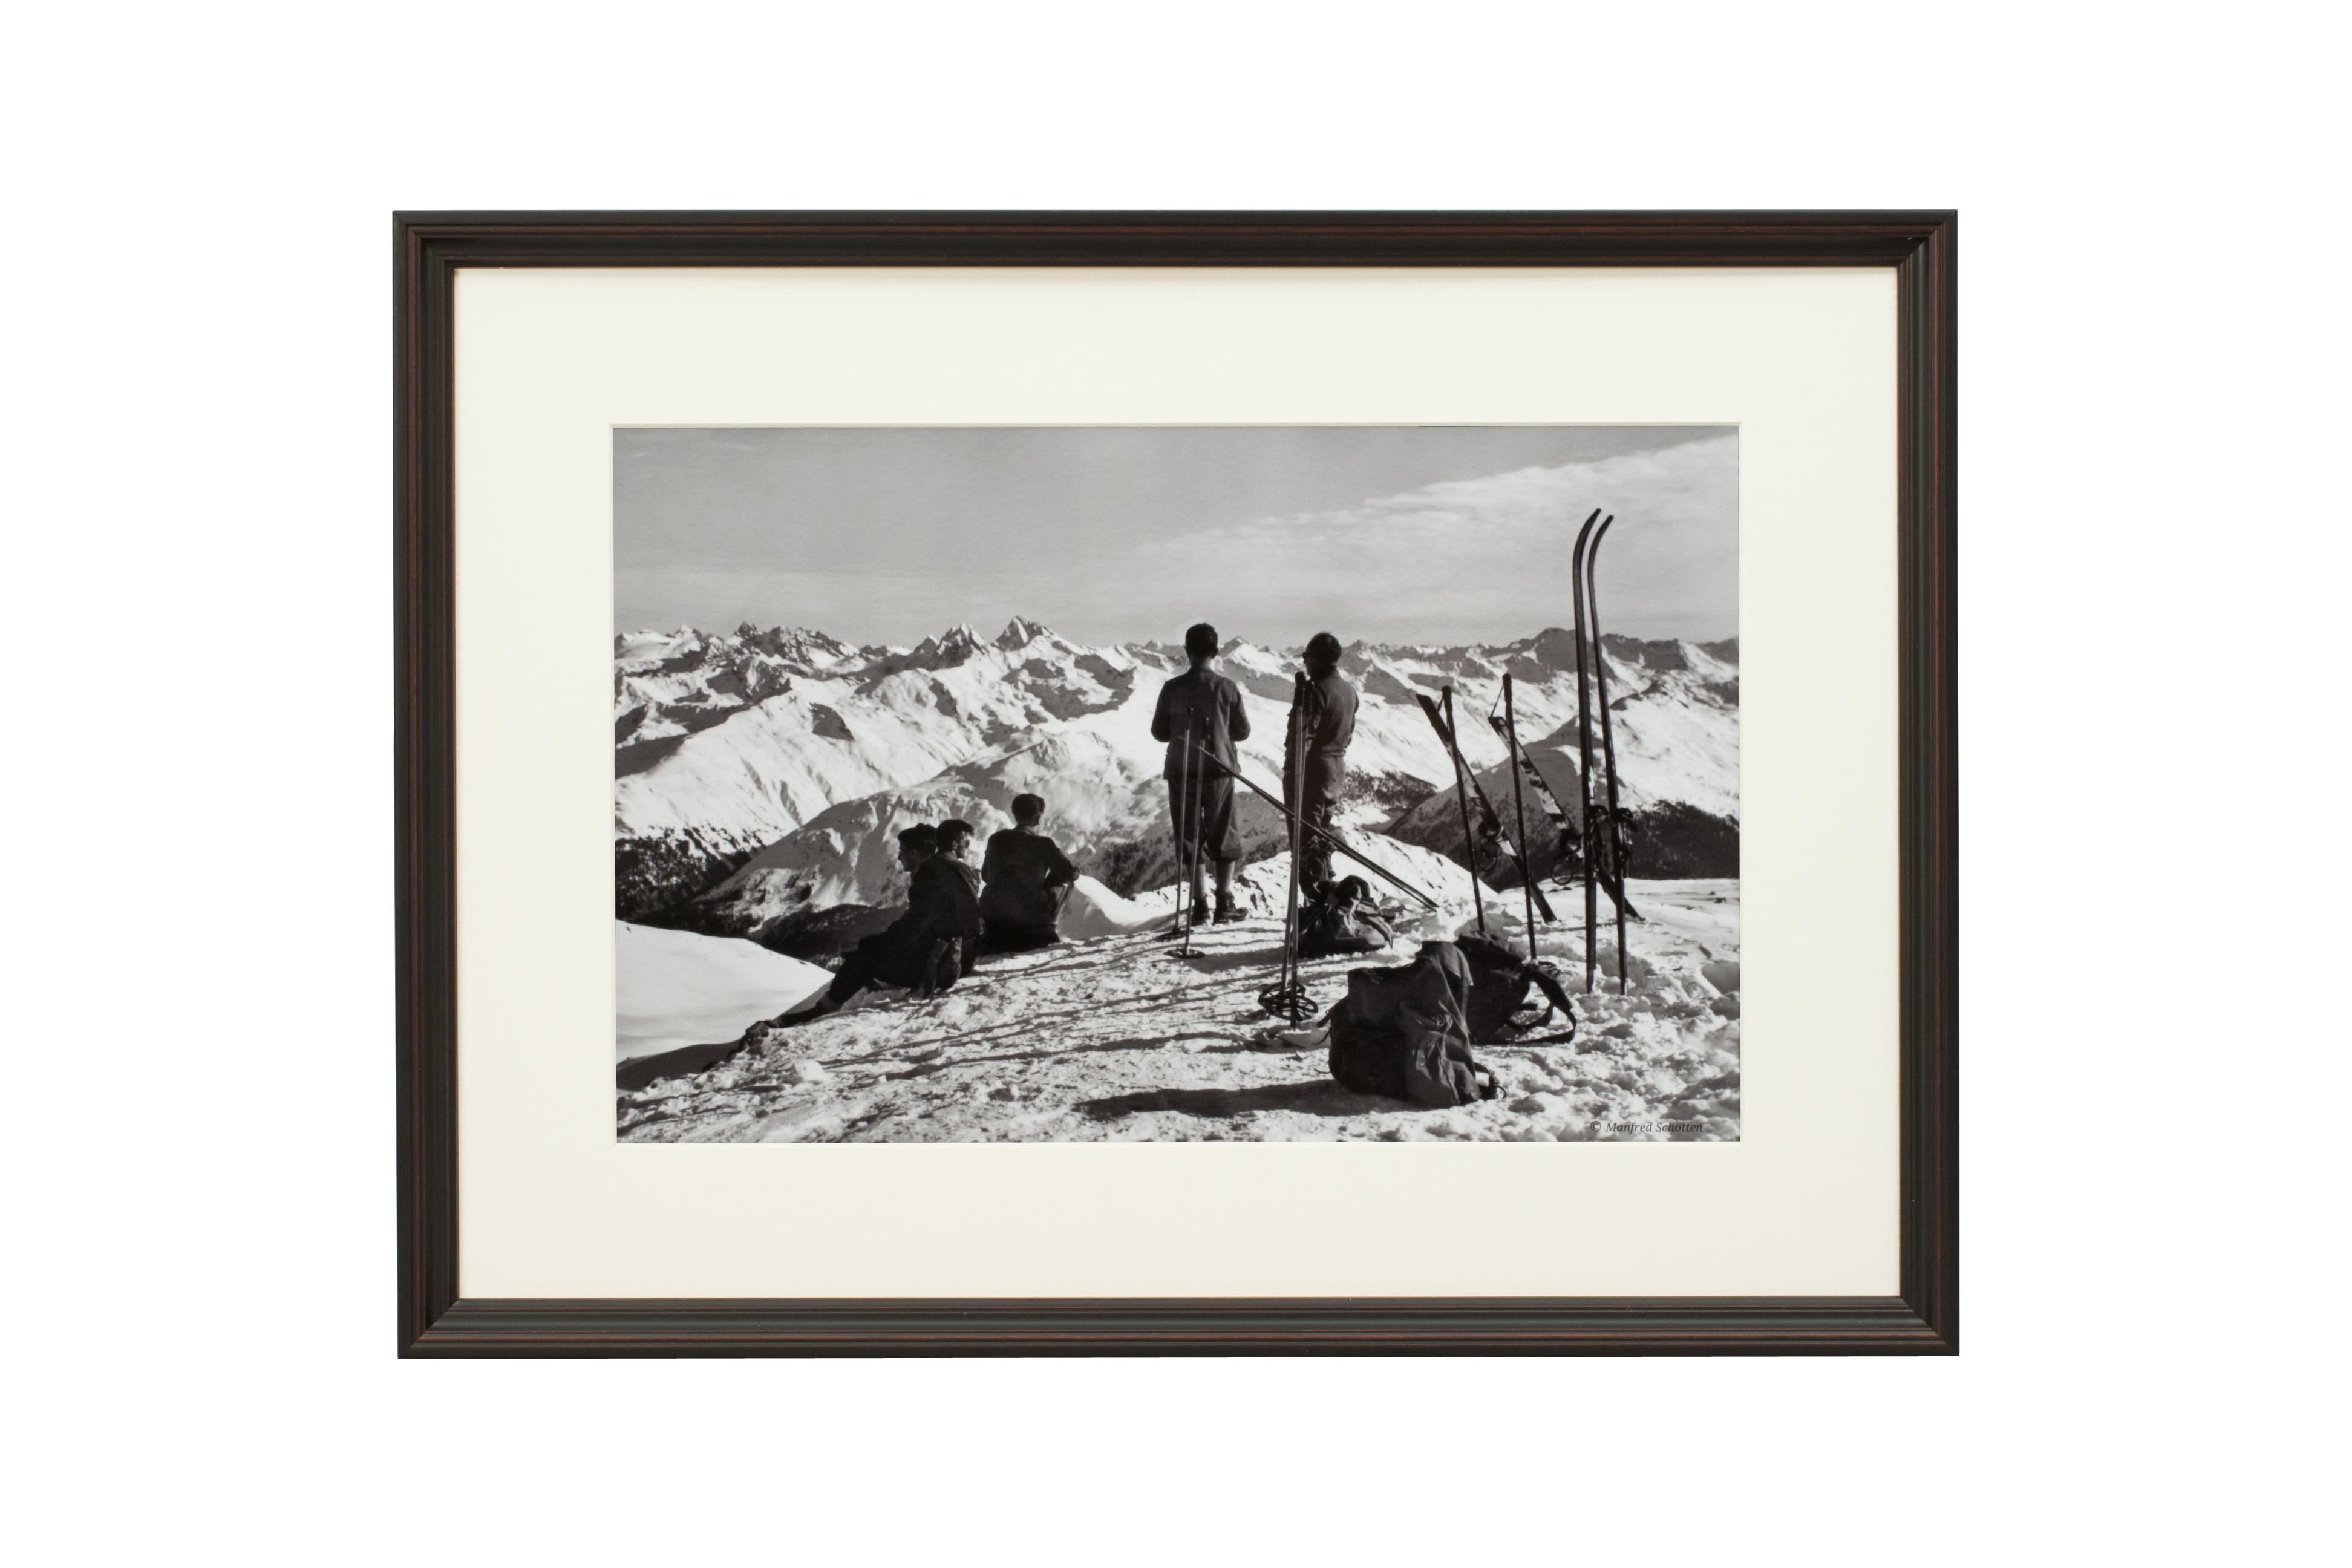 'DAVOS, PARSENN', a modern framed and mounted black and white photographic image after an original 1930s skiing photograph. The frame is a hand coloured reeded wooden black frame. Black & white alpine photos are the perfect addition to any home or